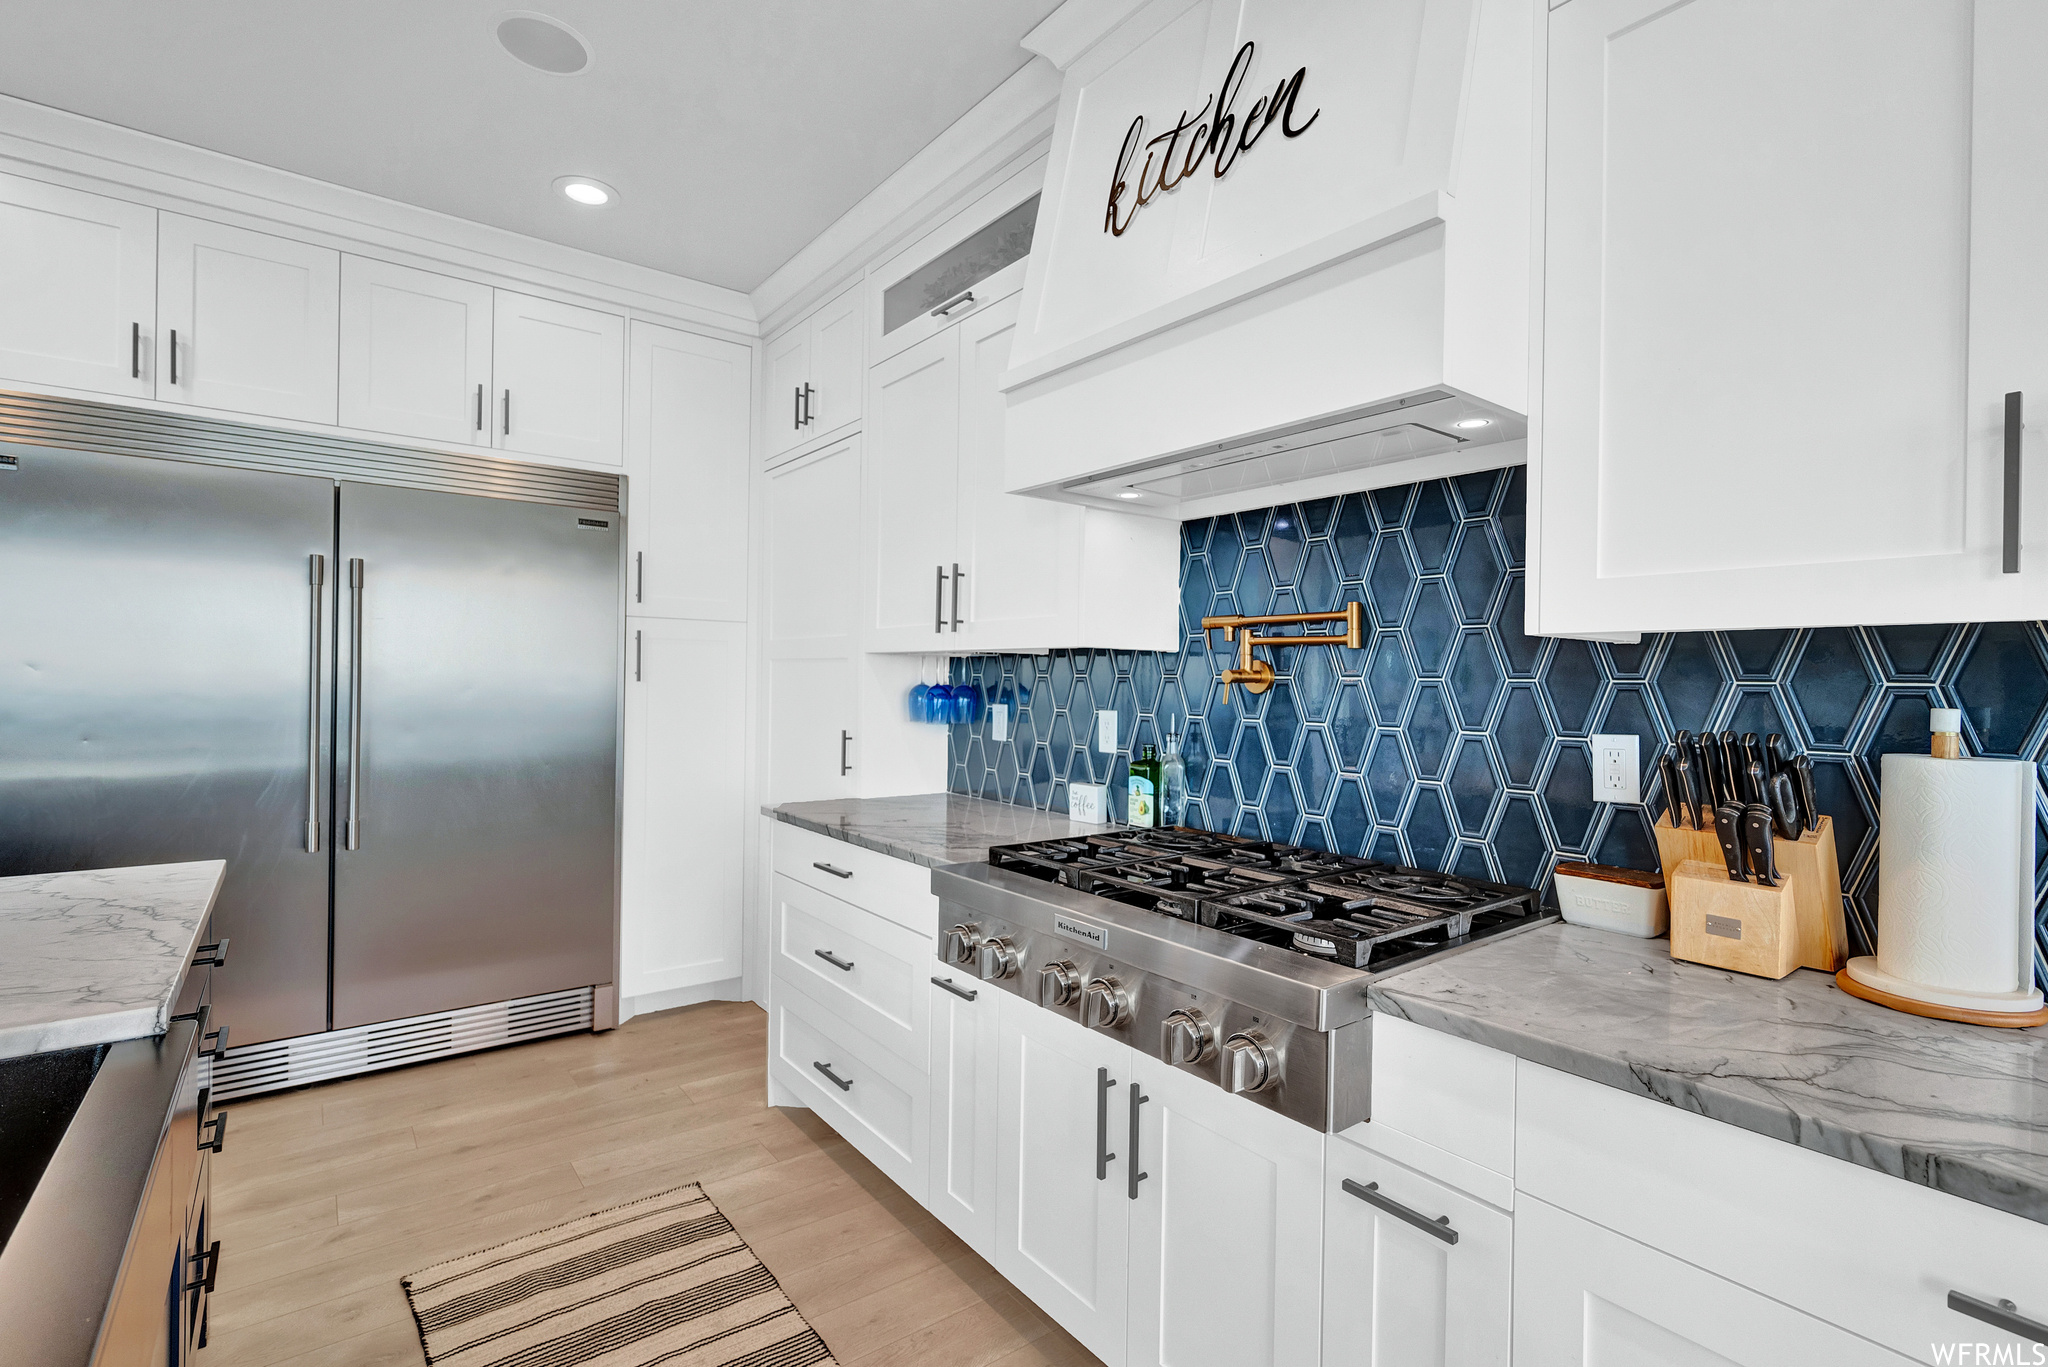 Kitchen featuring exhaust hood, refrigerator, gas cooktop, light floors, light countertops, and white cabinets